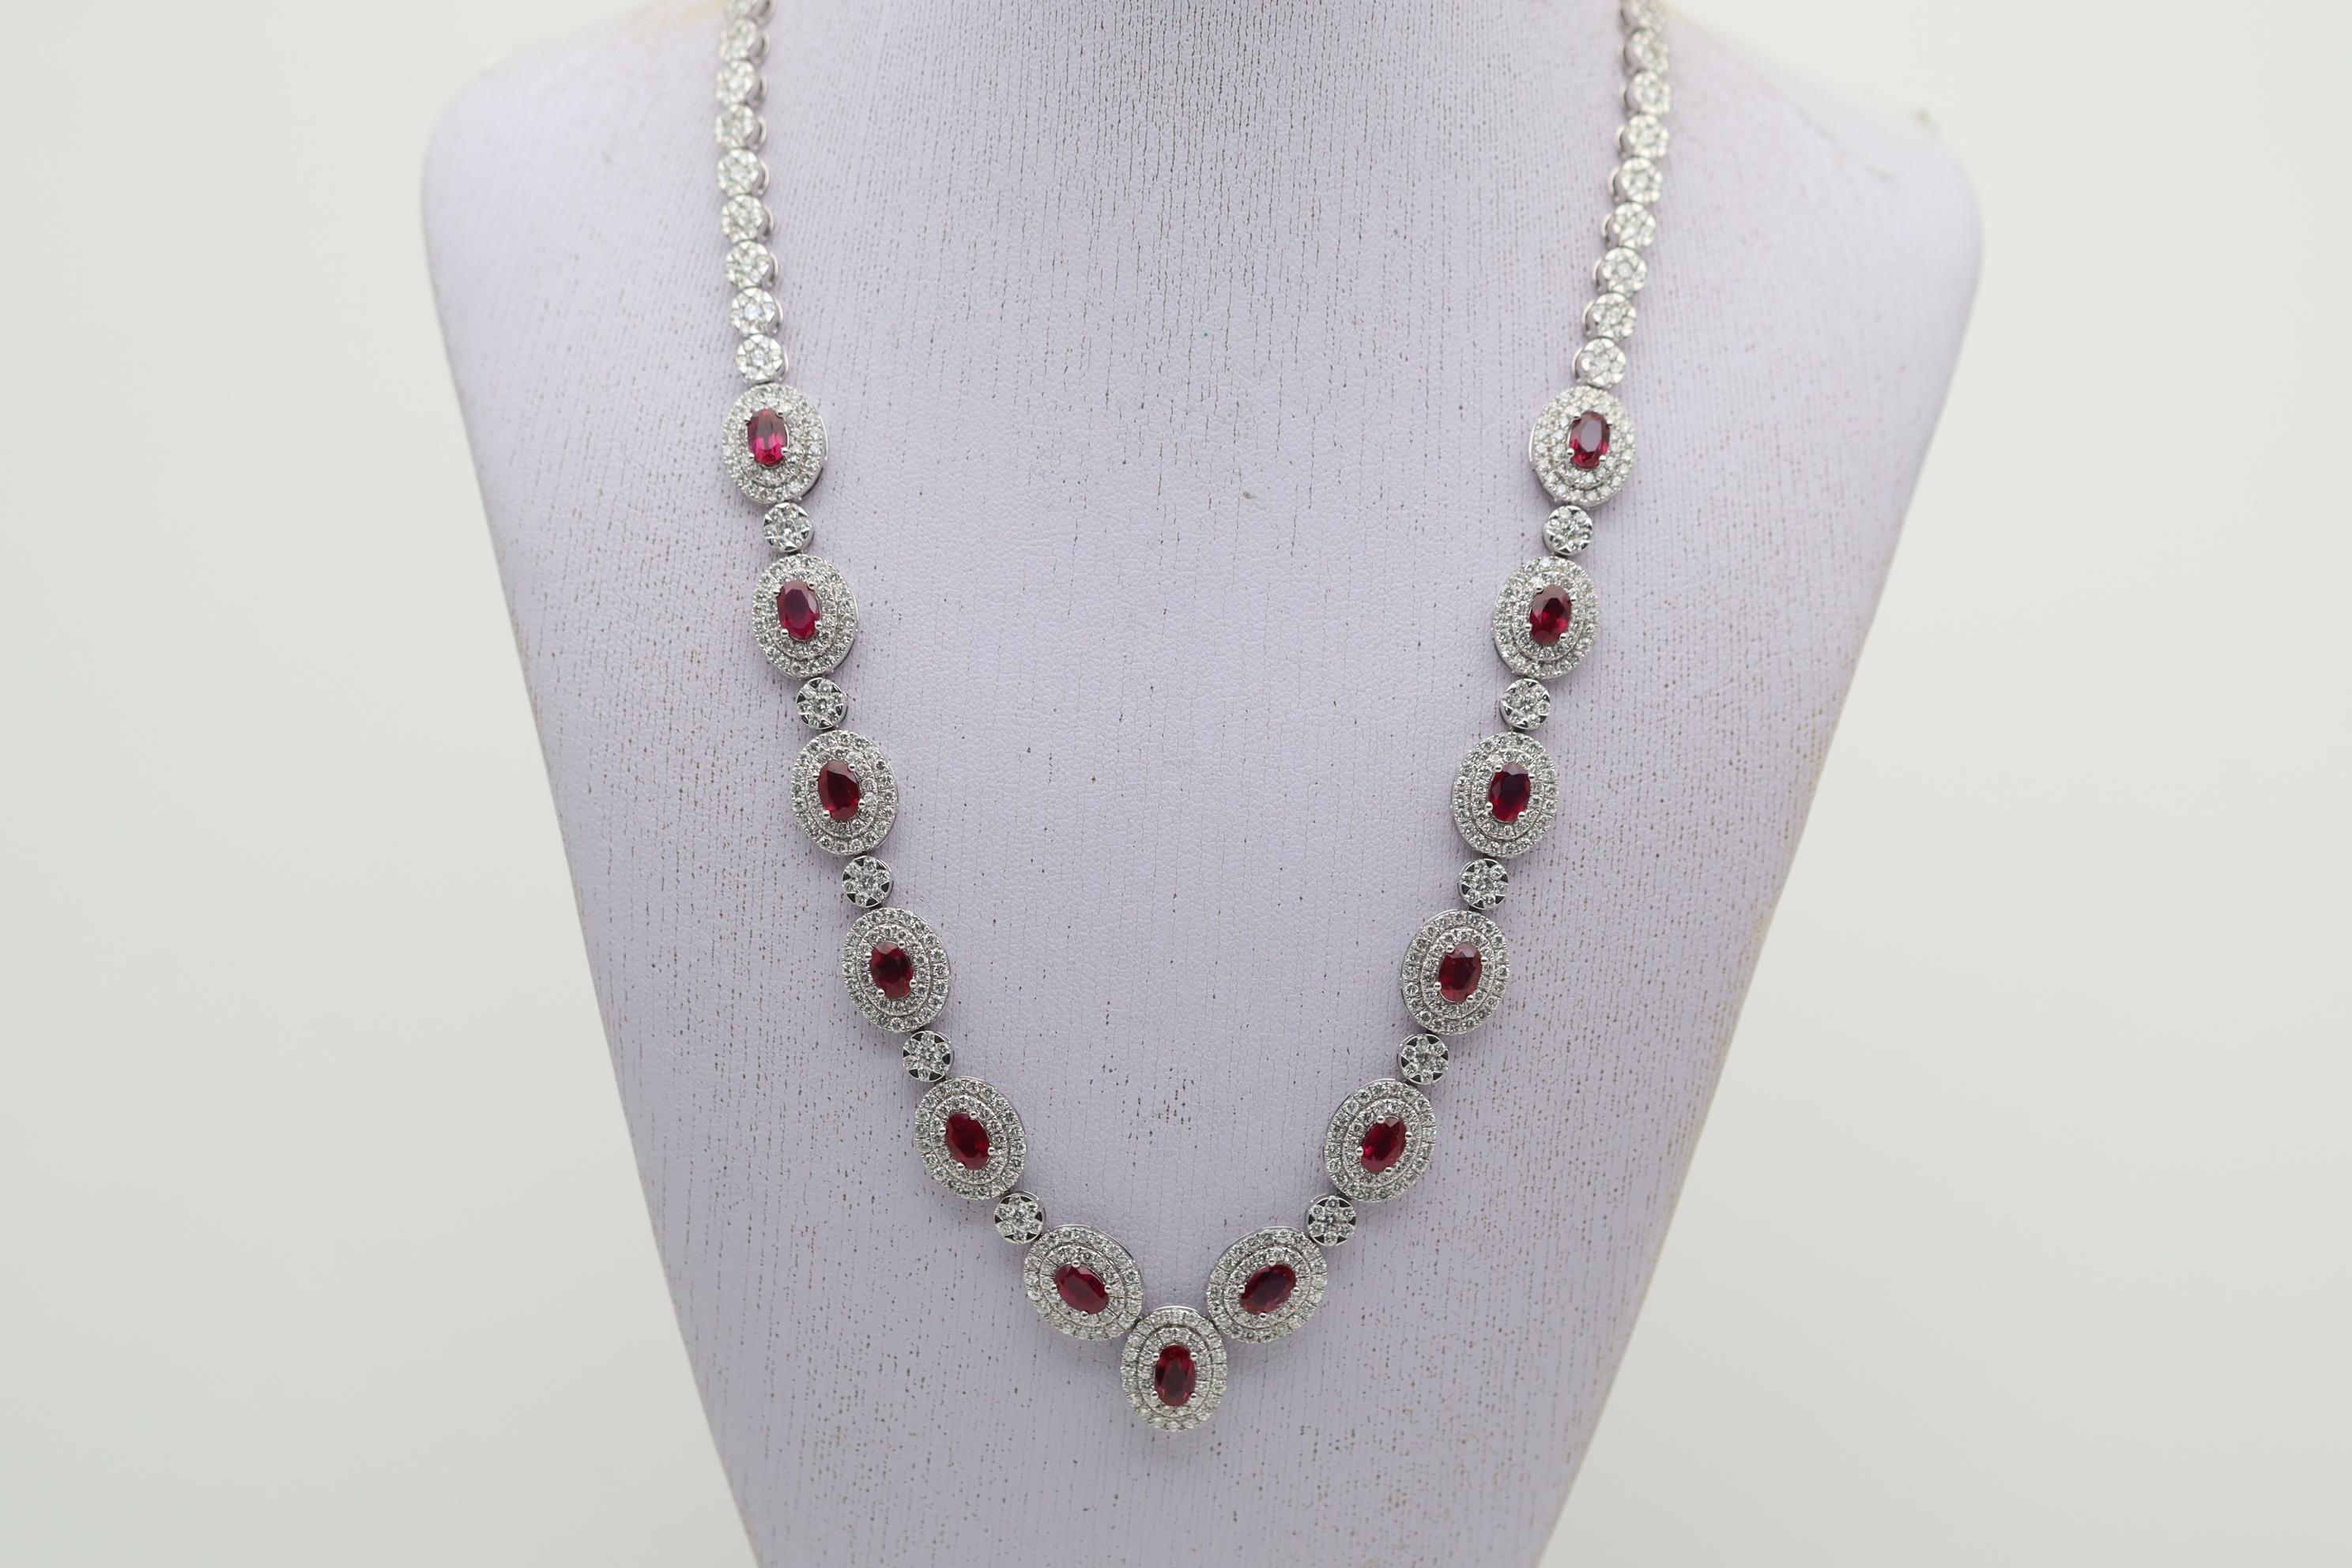 A stunning dinner necklace studded with fine gems and diamonds! The necklace features 13 fine oval-shaped rubies weighing 7.85 carats. They are all perfectly matching in shape size and color, as they all have a rich vivid red color. Adding to the